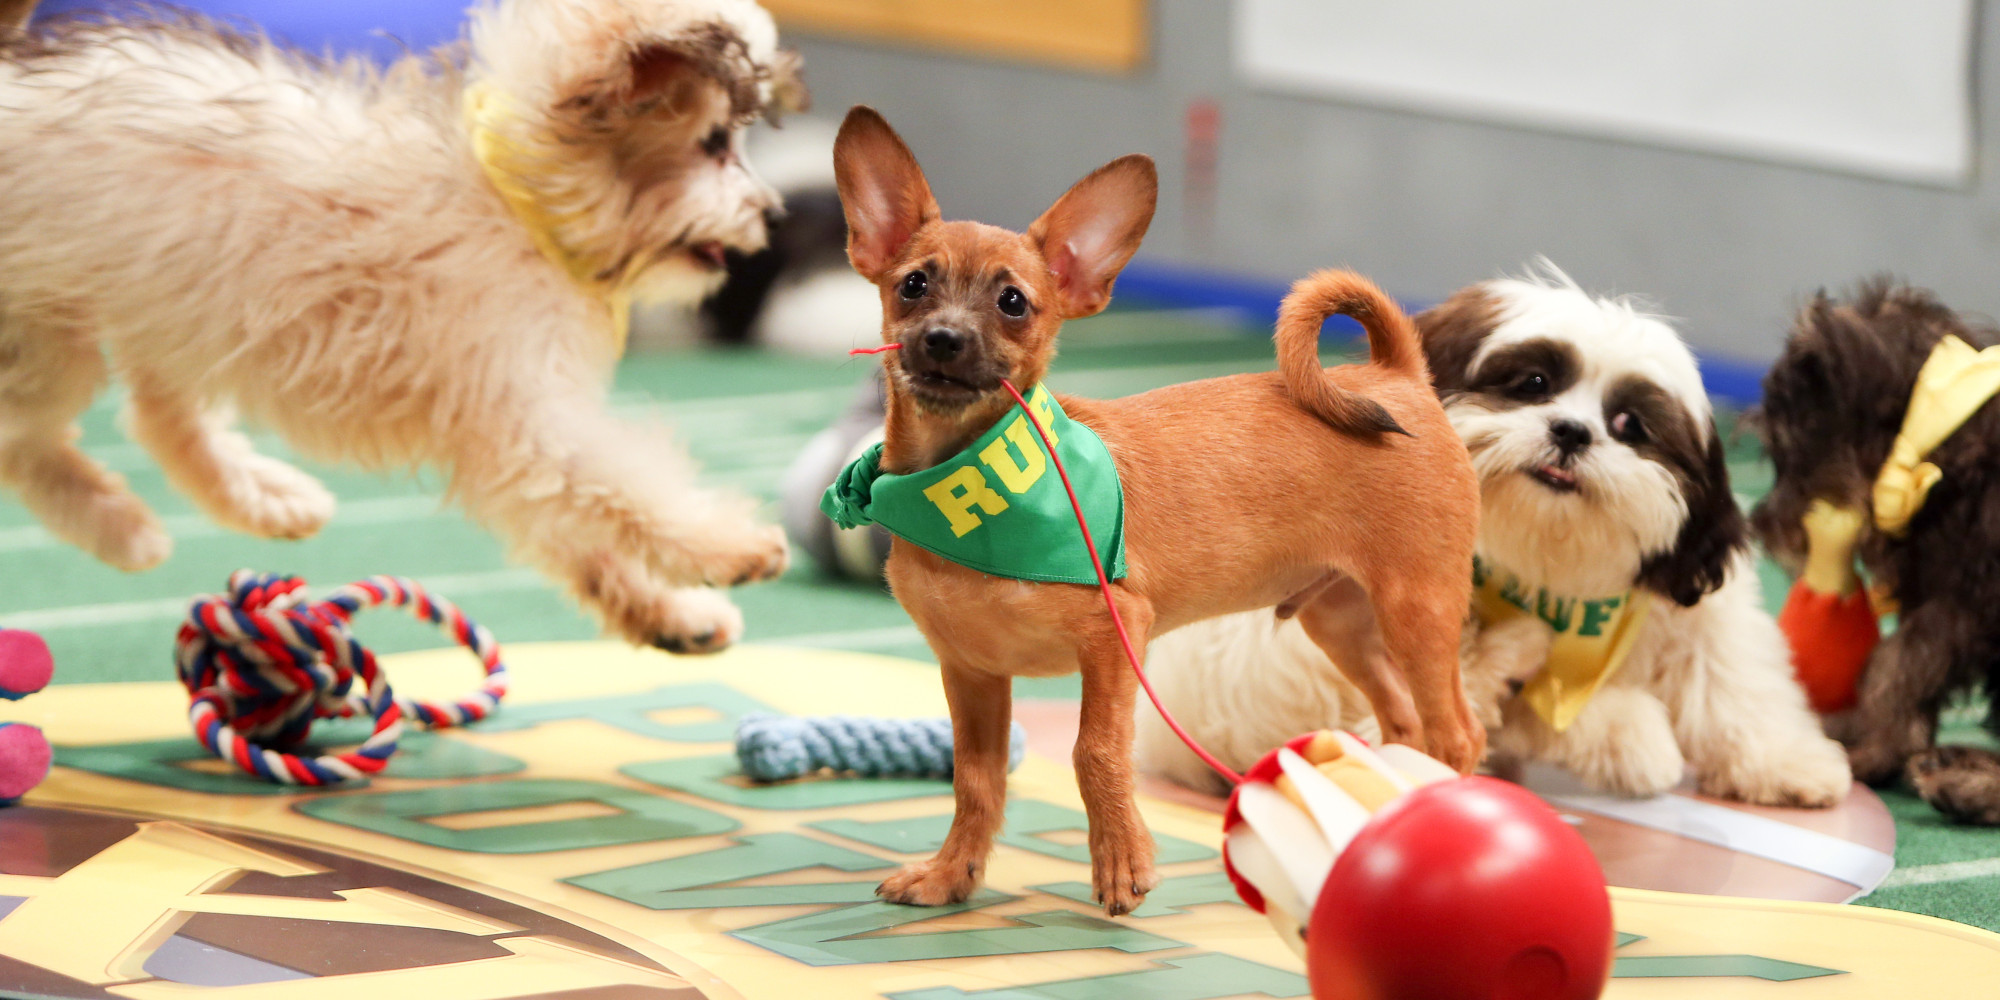 The Puppy Bowl's Utterly Adorable And Powerful Adoption Message | HuffPost2000 x 1000